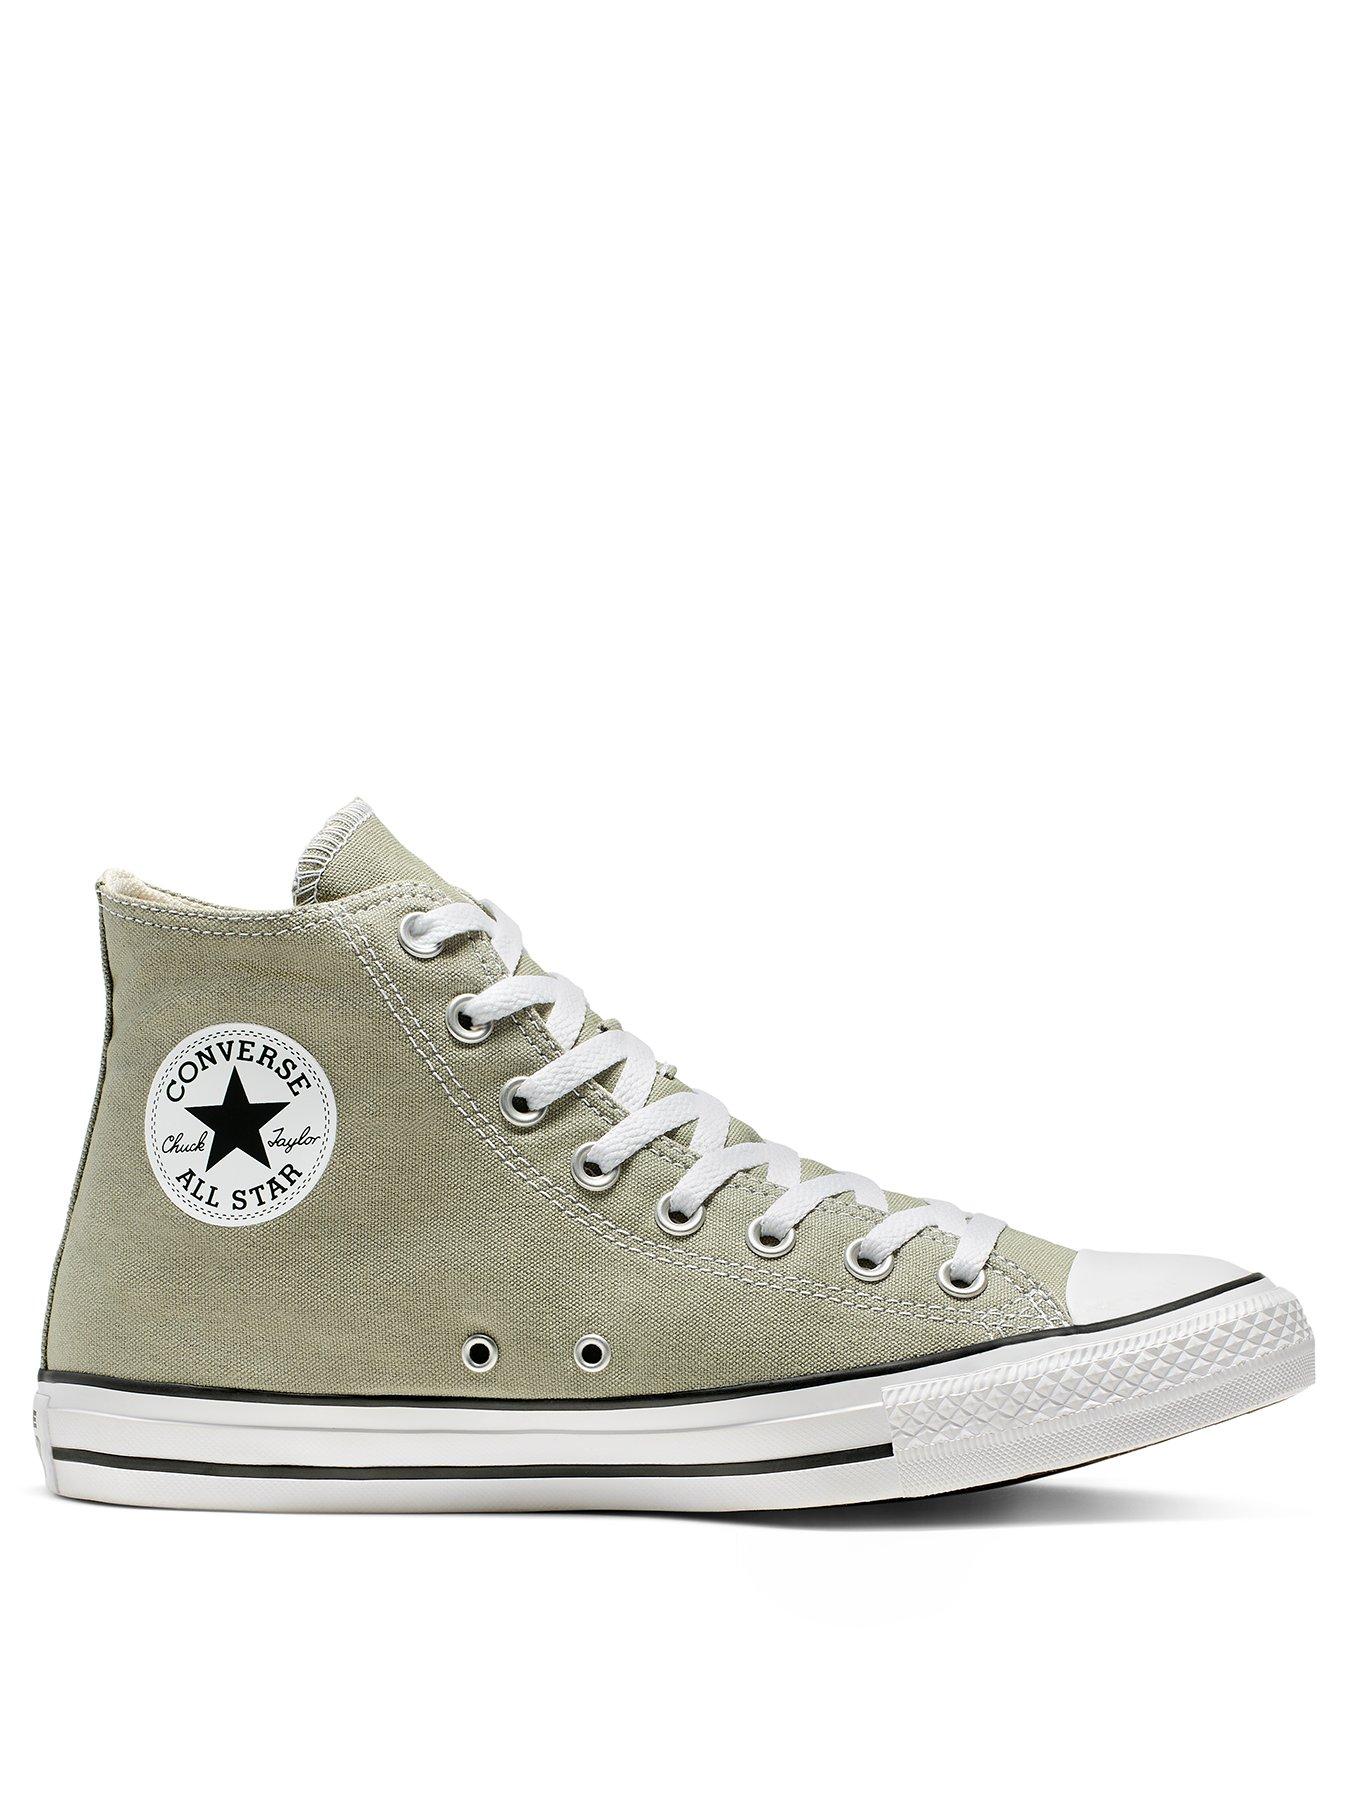 how much are converse in ireland